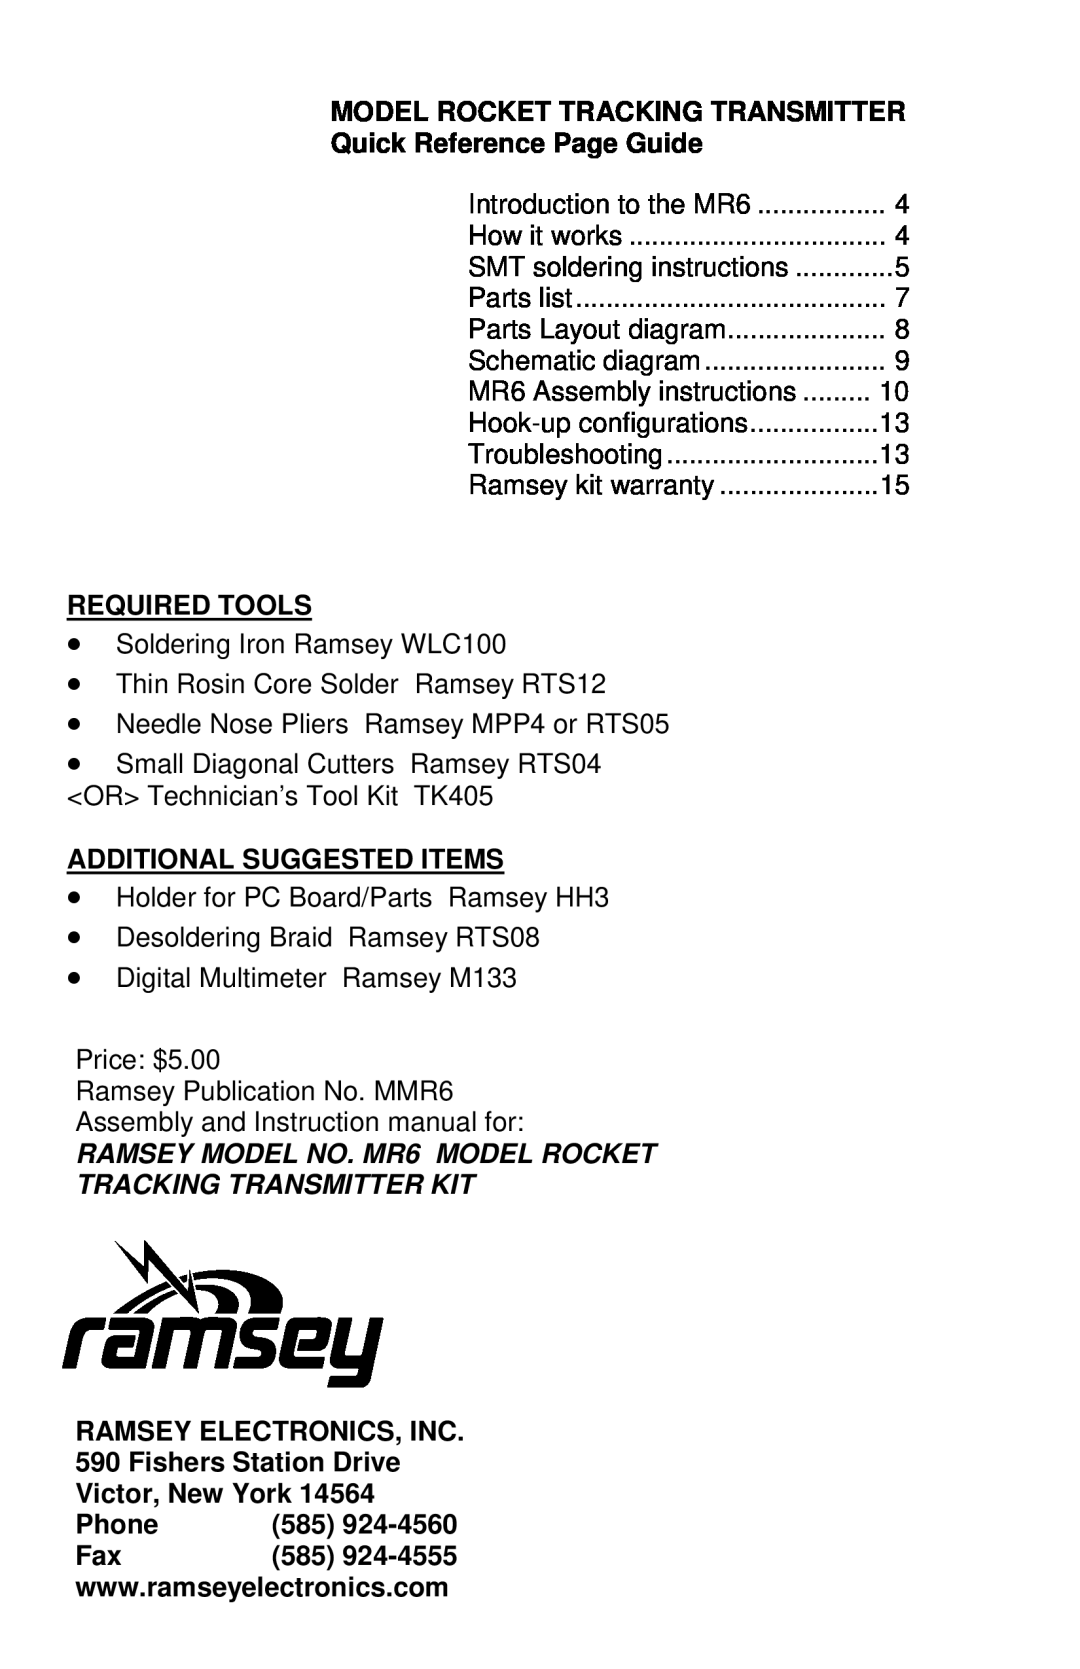 Ramsey Electronics MR6 Model Rocket Tracking Transmitter, Quick Reference Page Guide, Required Tools, Victor, New York 